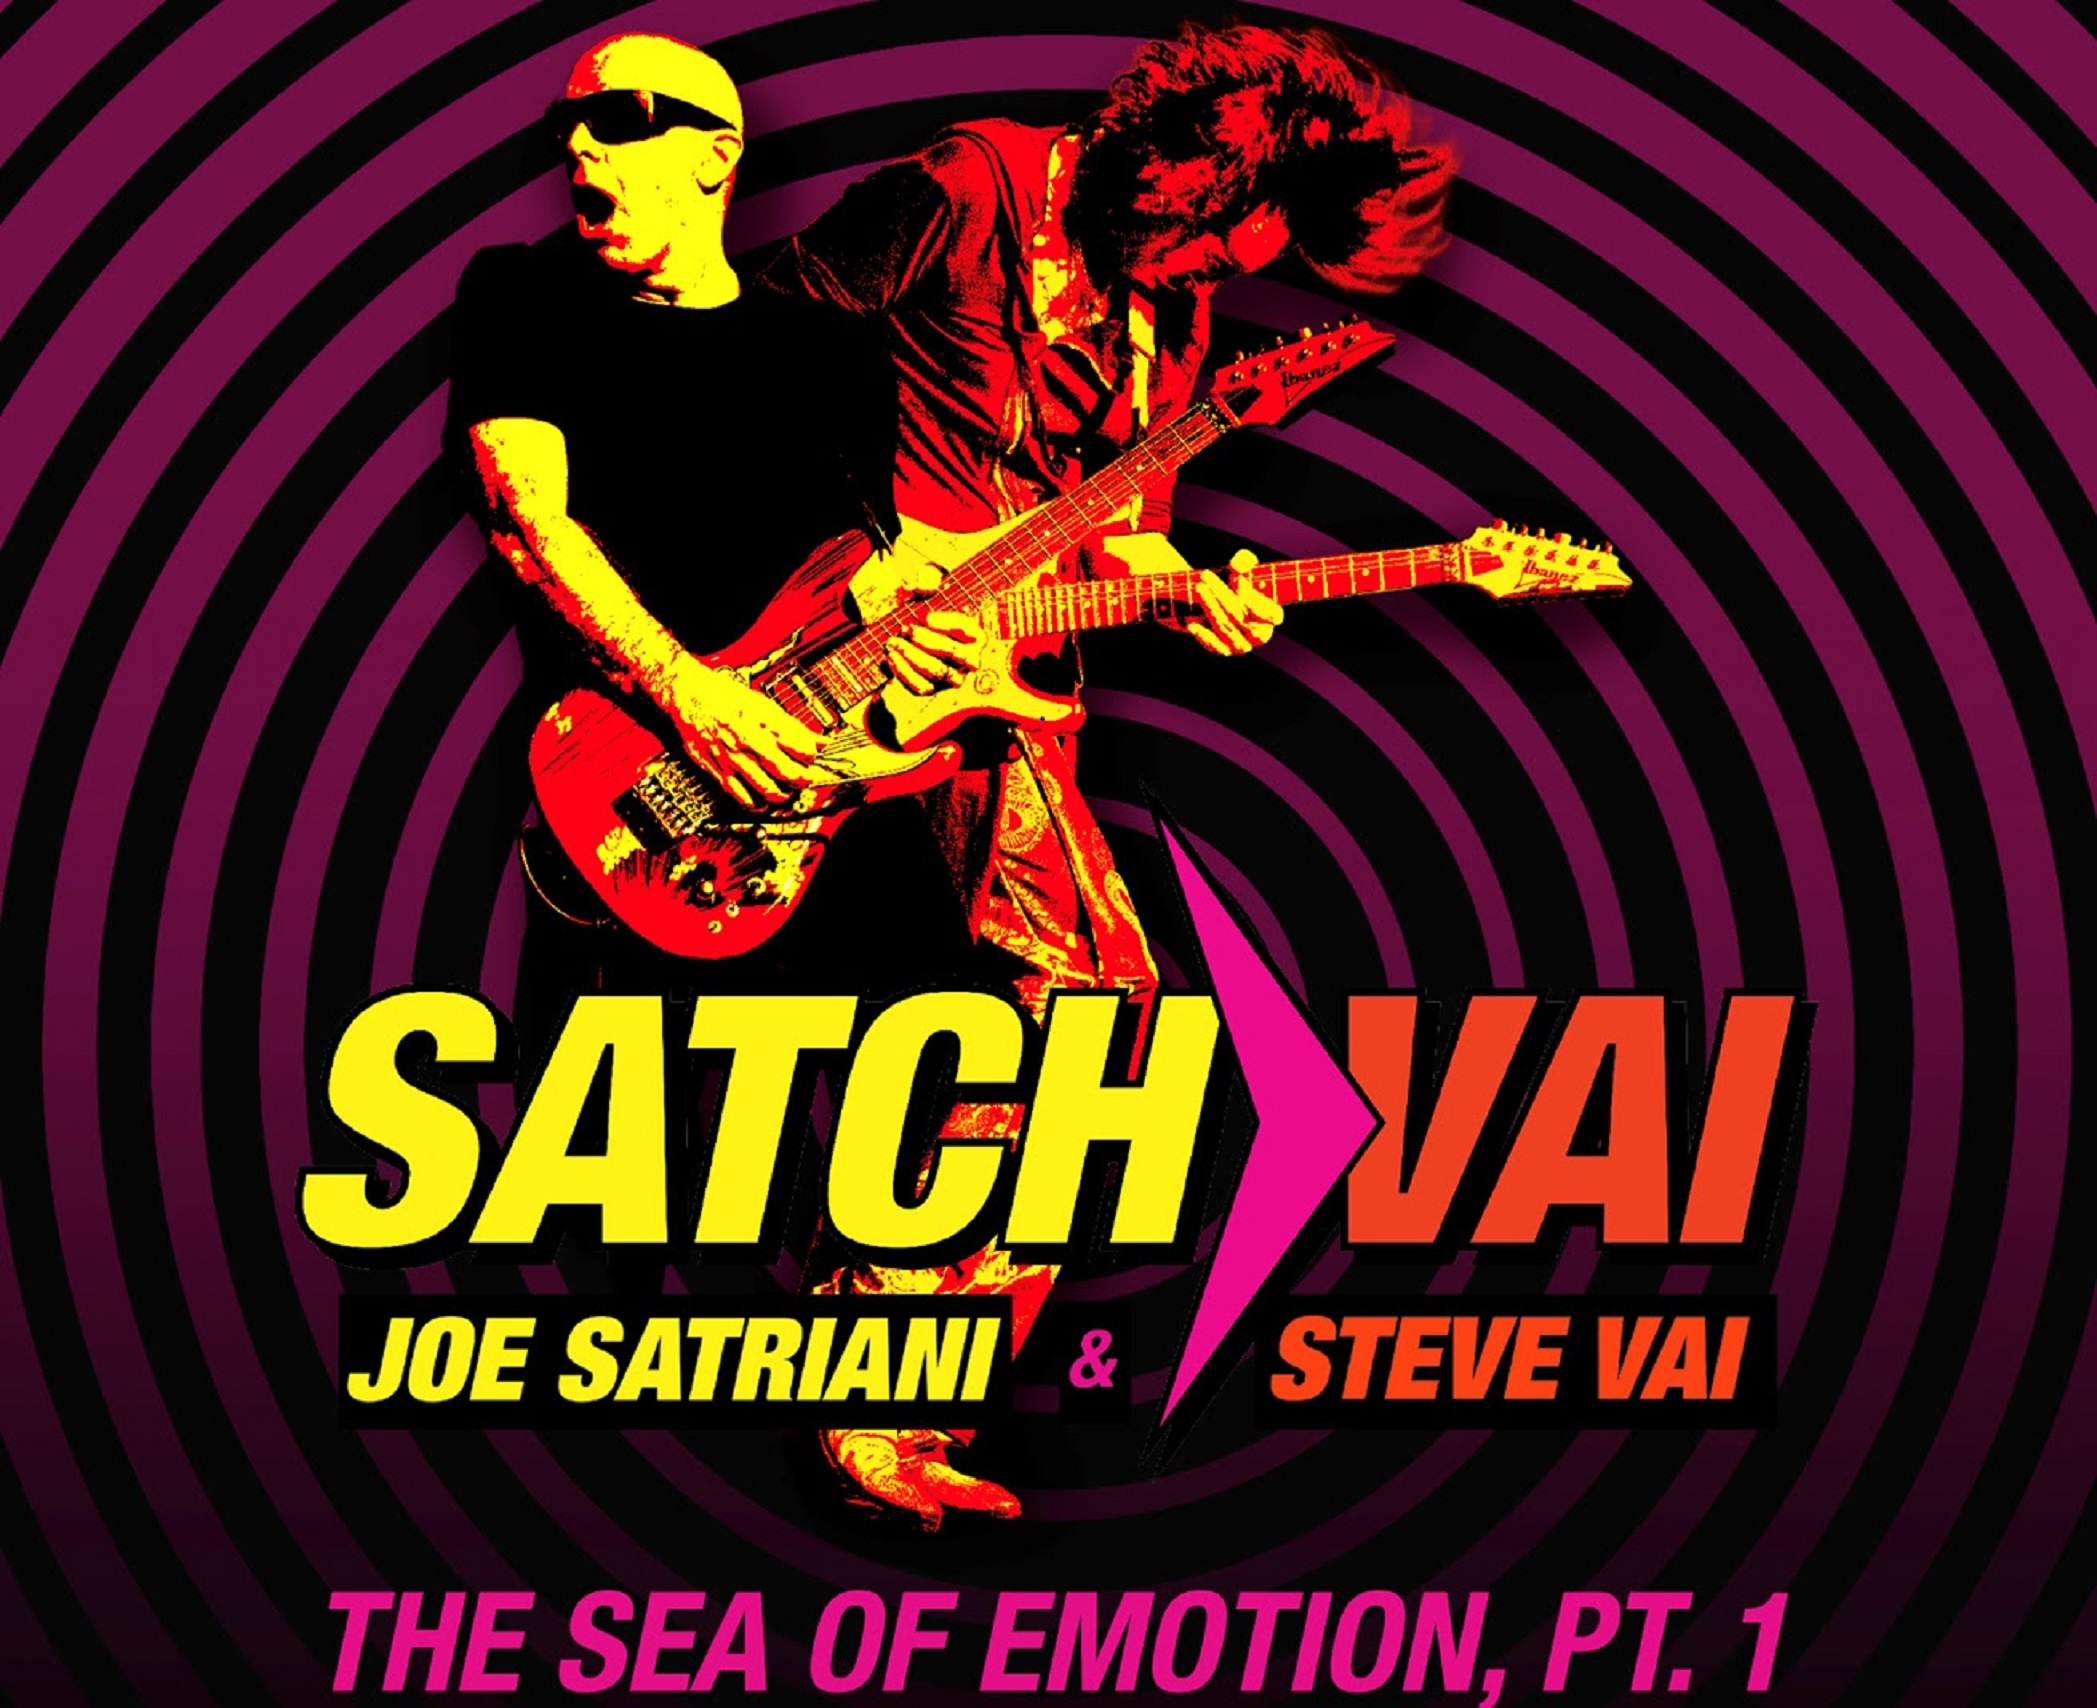 JOE SATRIANI AND STEVE VAI Release New Music Together For The First Time - “The Sea of Emotion, Pt. 1”